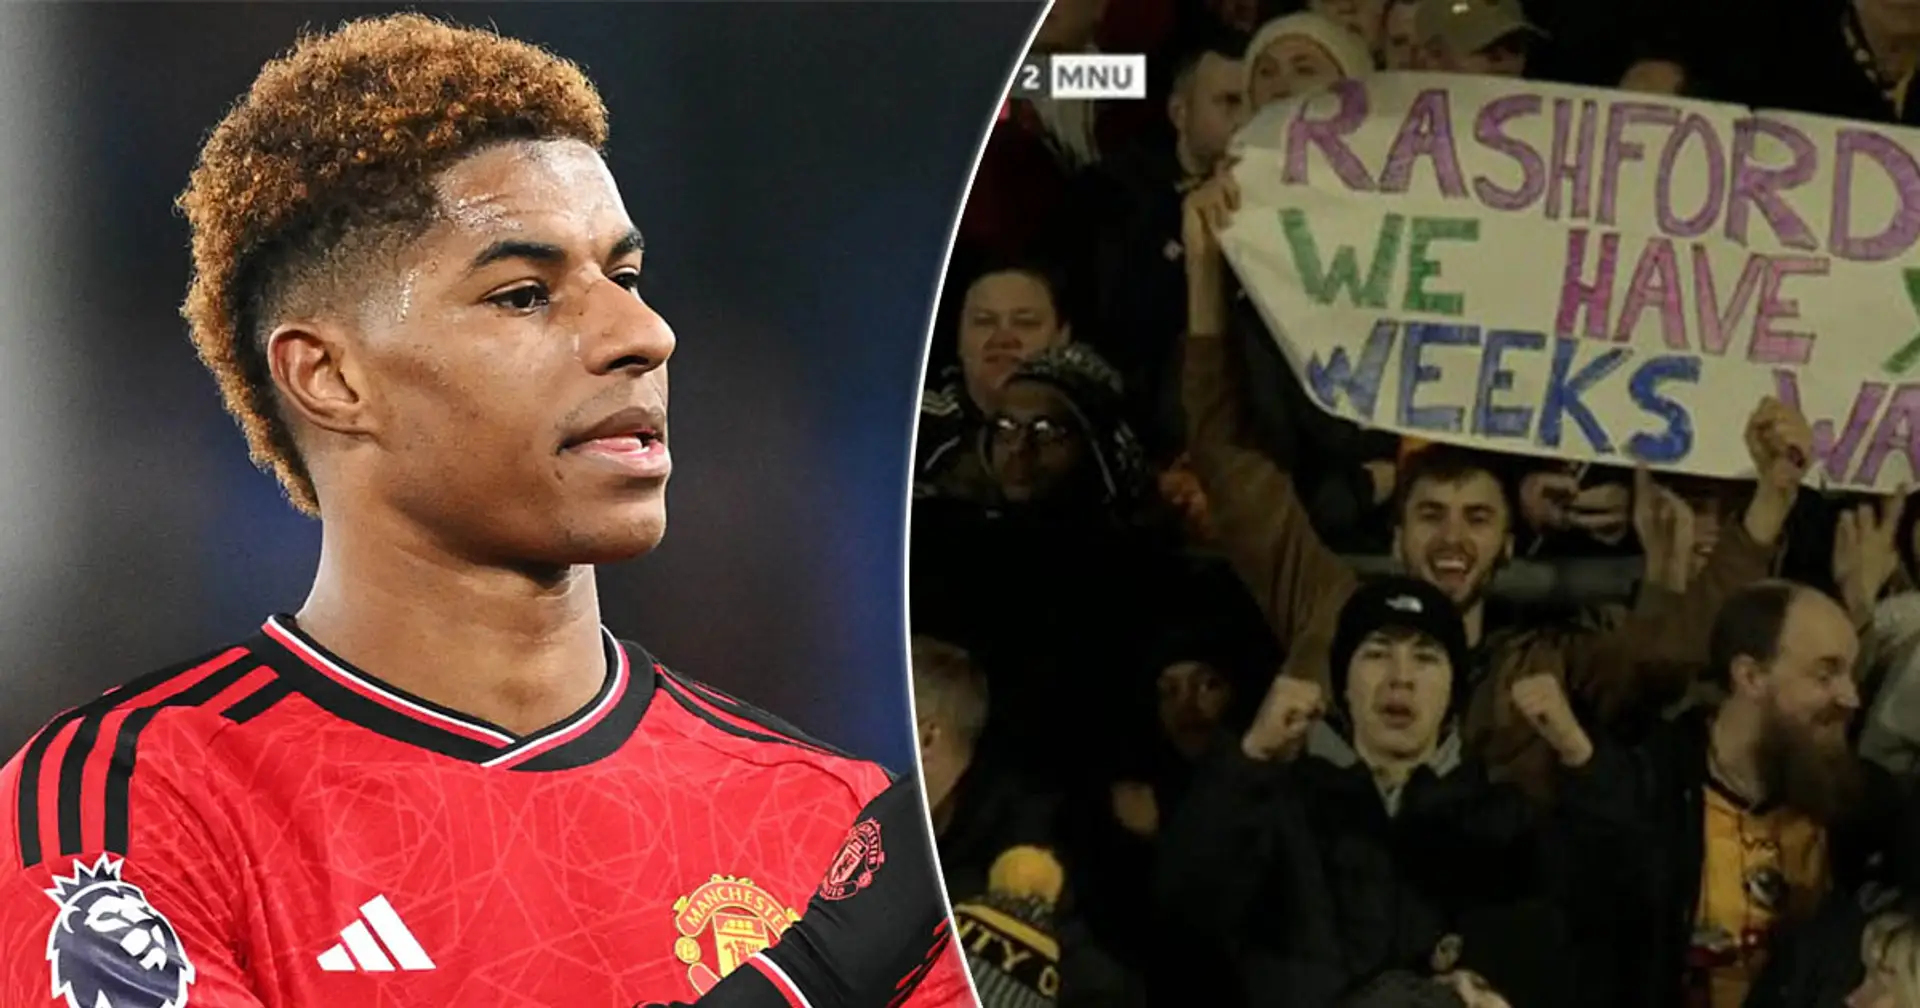 Caught on camera: Newport fans unveil cheeky banner in dig at Rashford